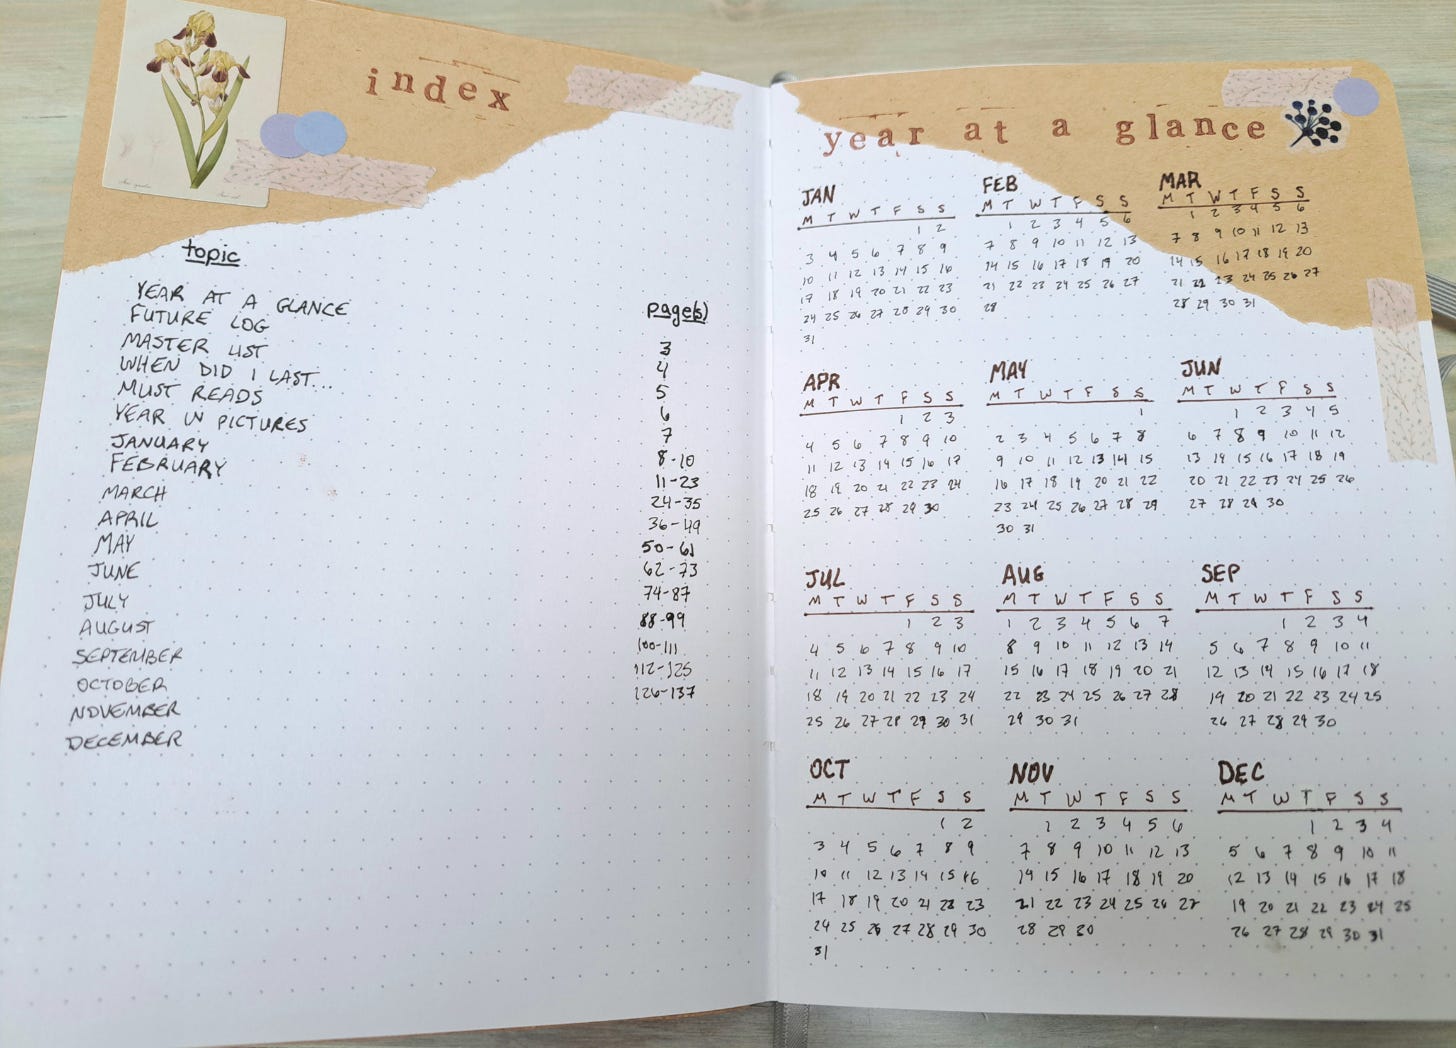 Image of my notebook with an index listed on the left page and calendars for each month of the year on the right page